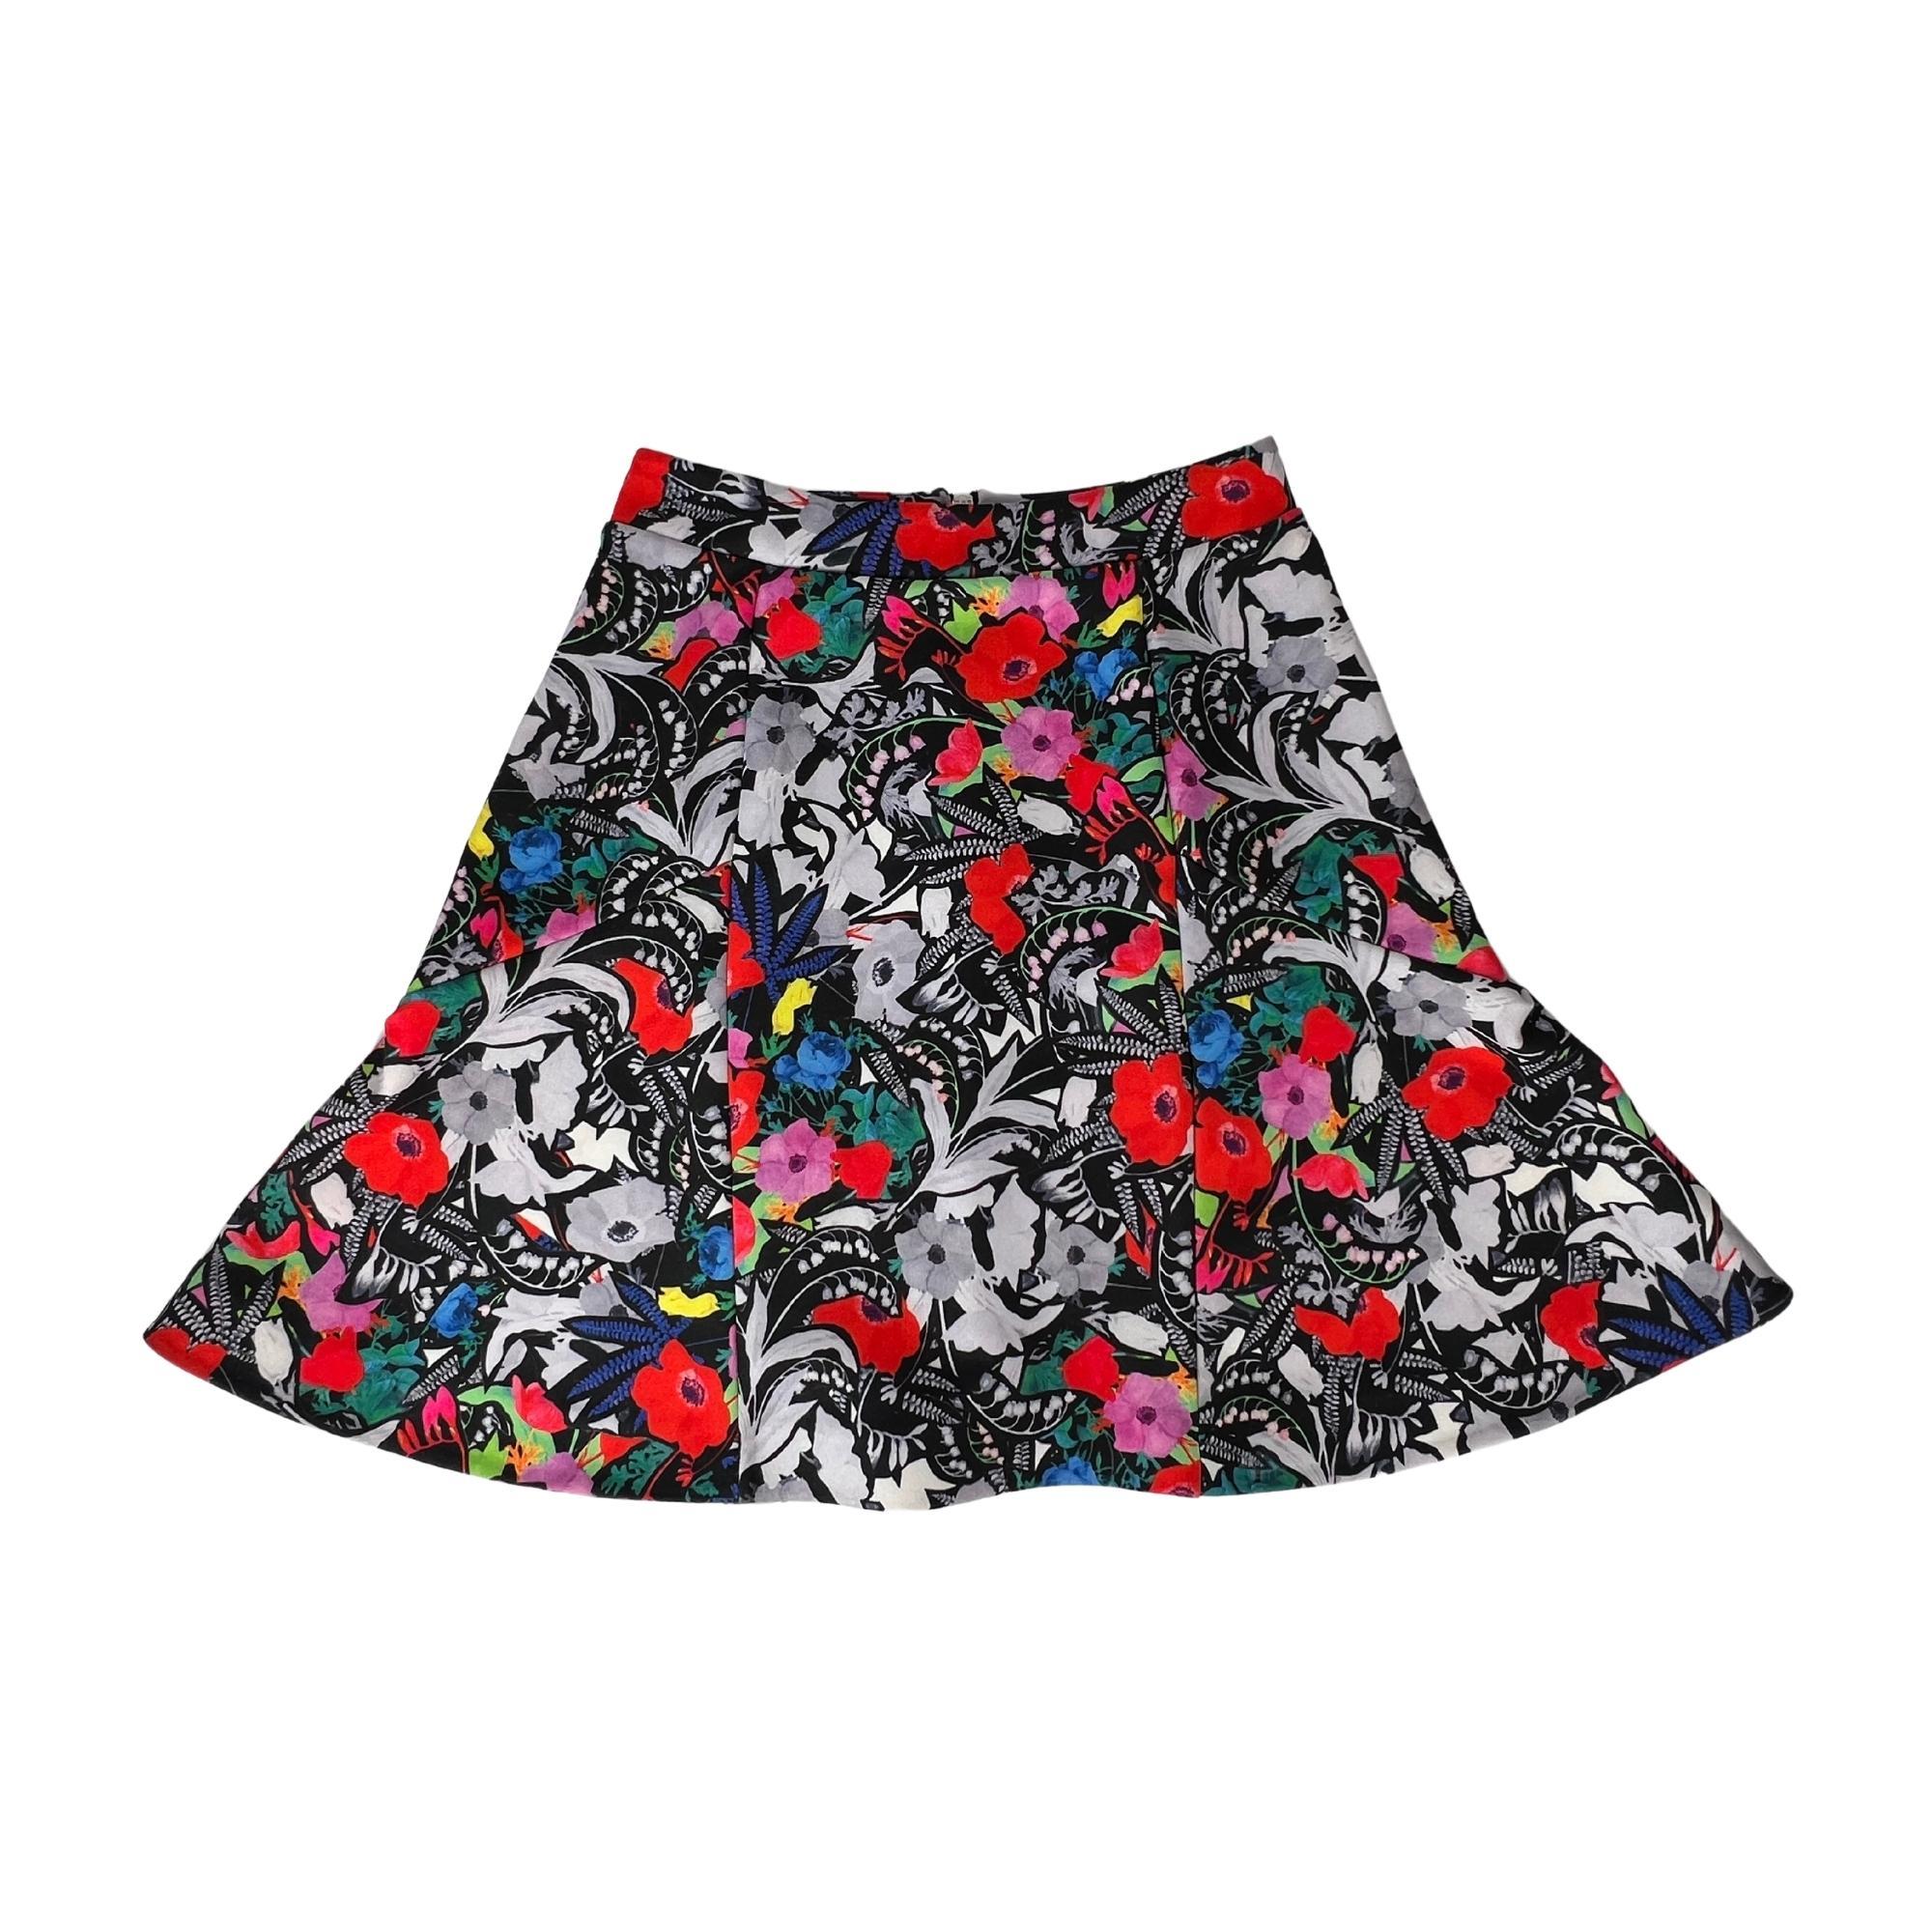 Sonia by Sonia Rykiel Floral Print Mini Skirt (Small) For Sale 1